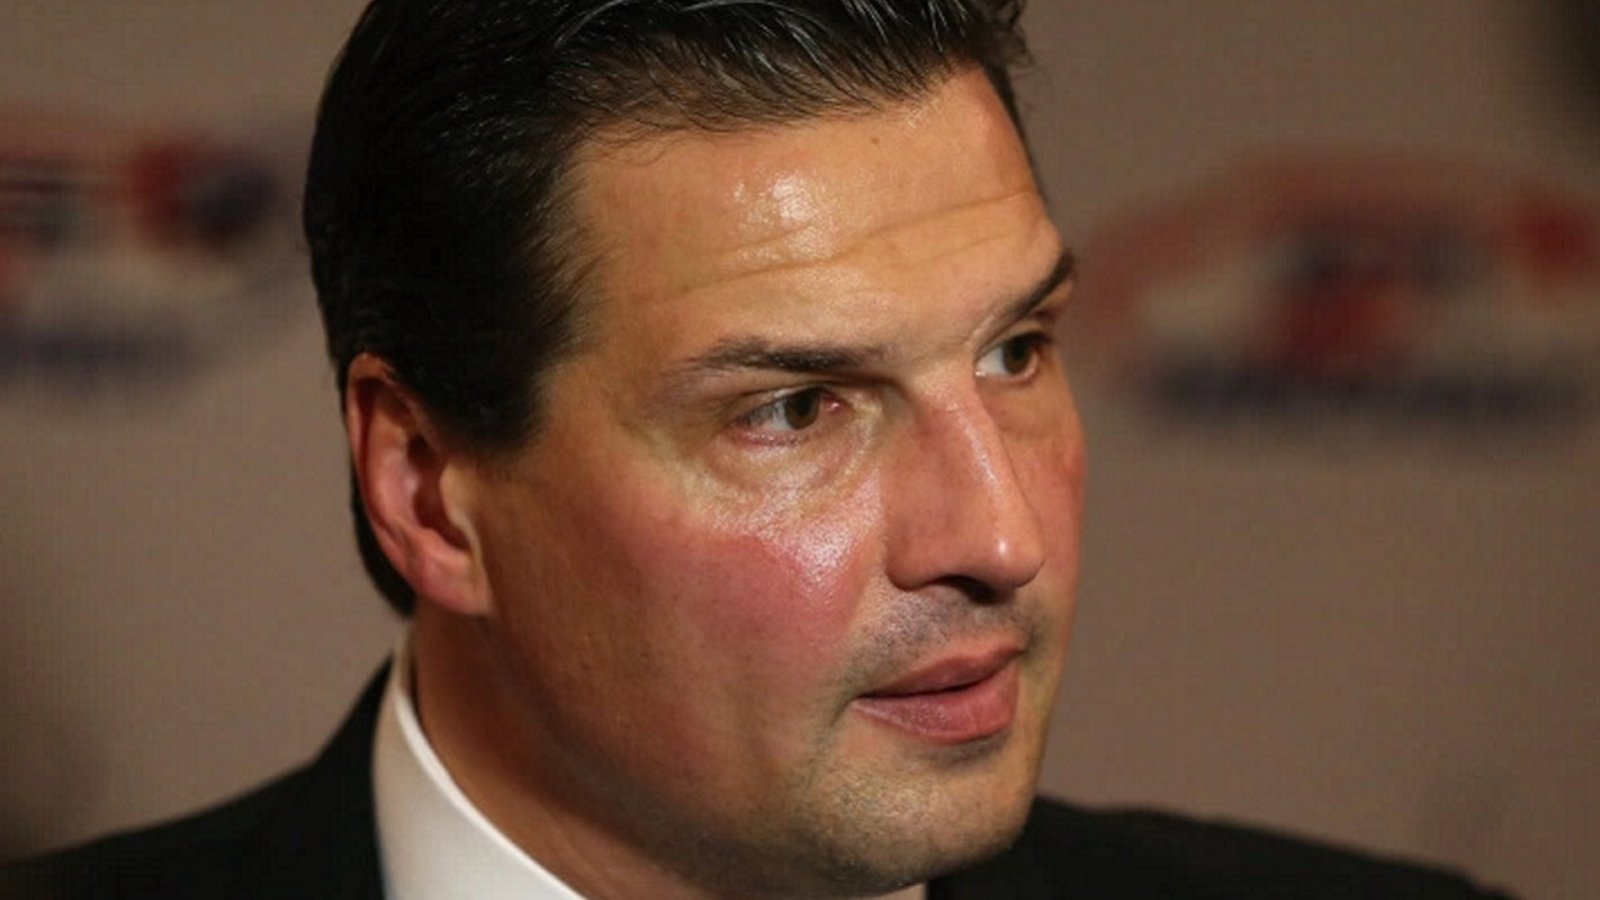 Update on Eddie Olczyk's tough battle with cancer.